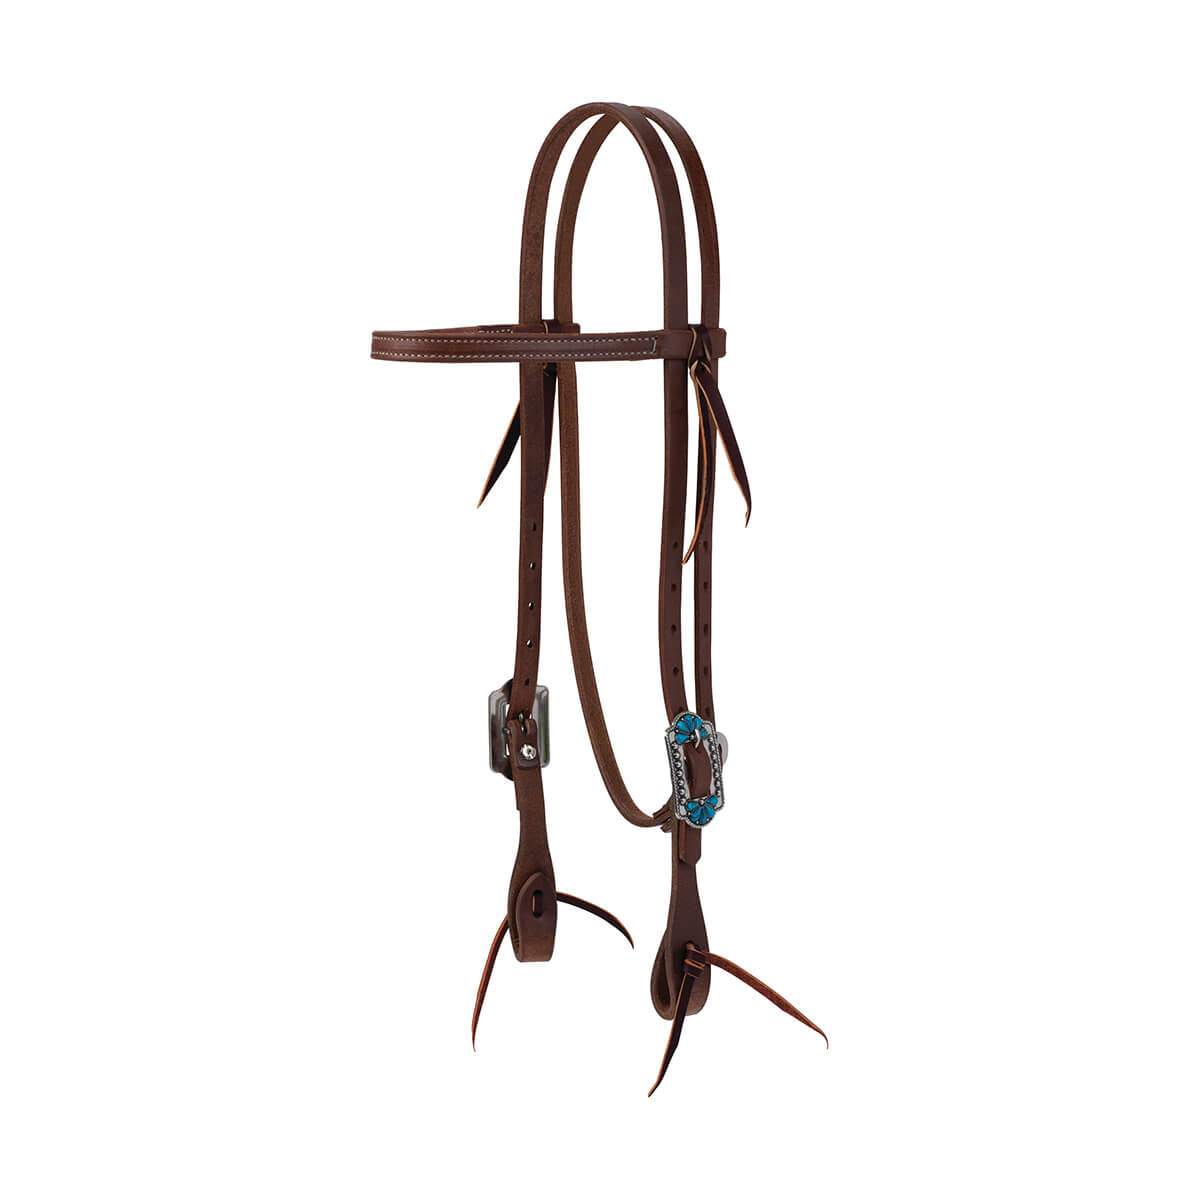 ProTack Headstall with Flower Design